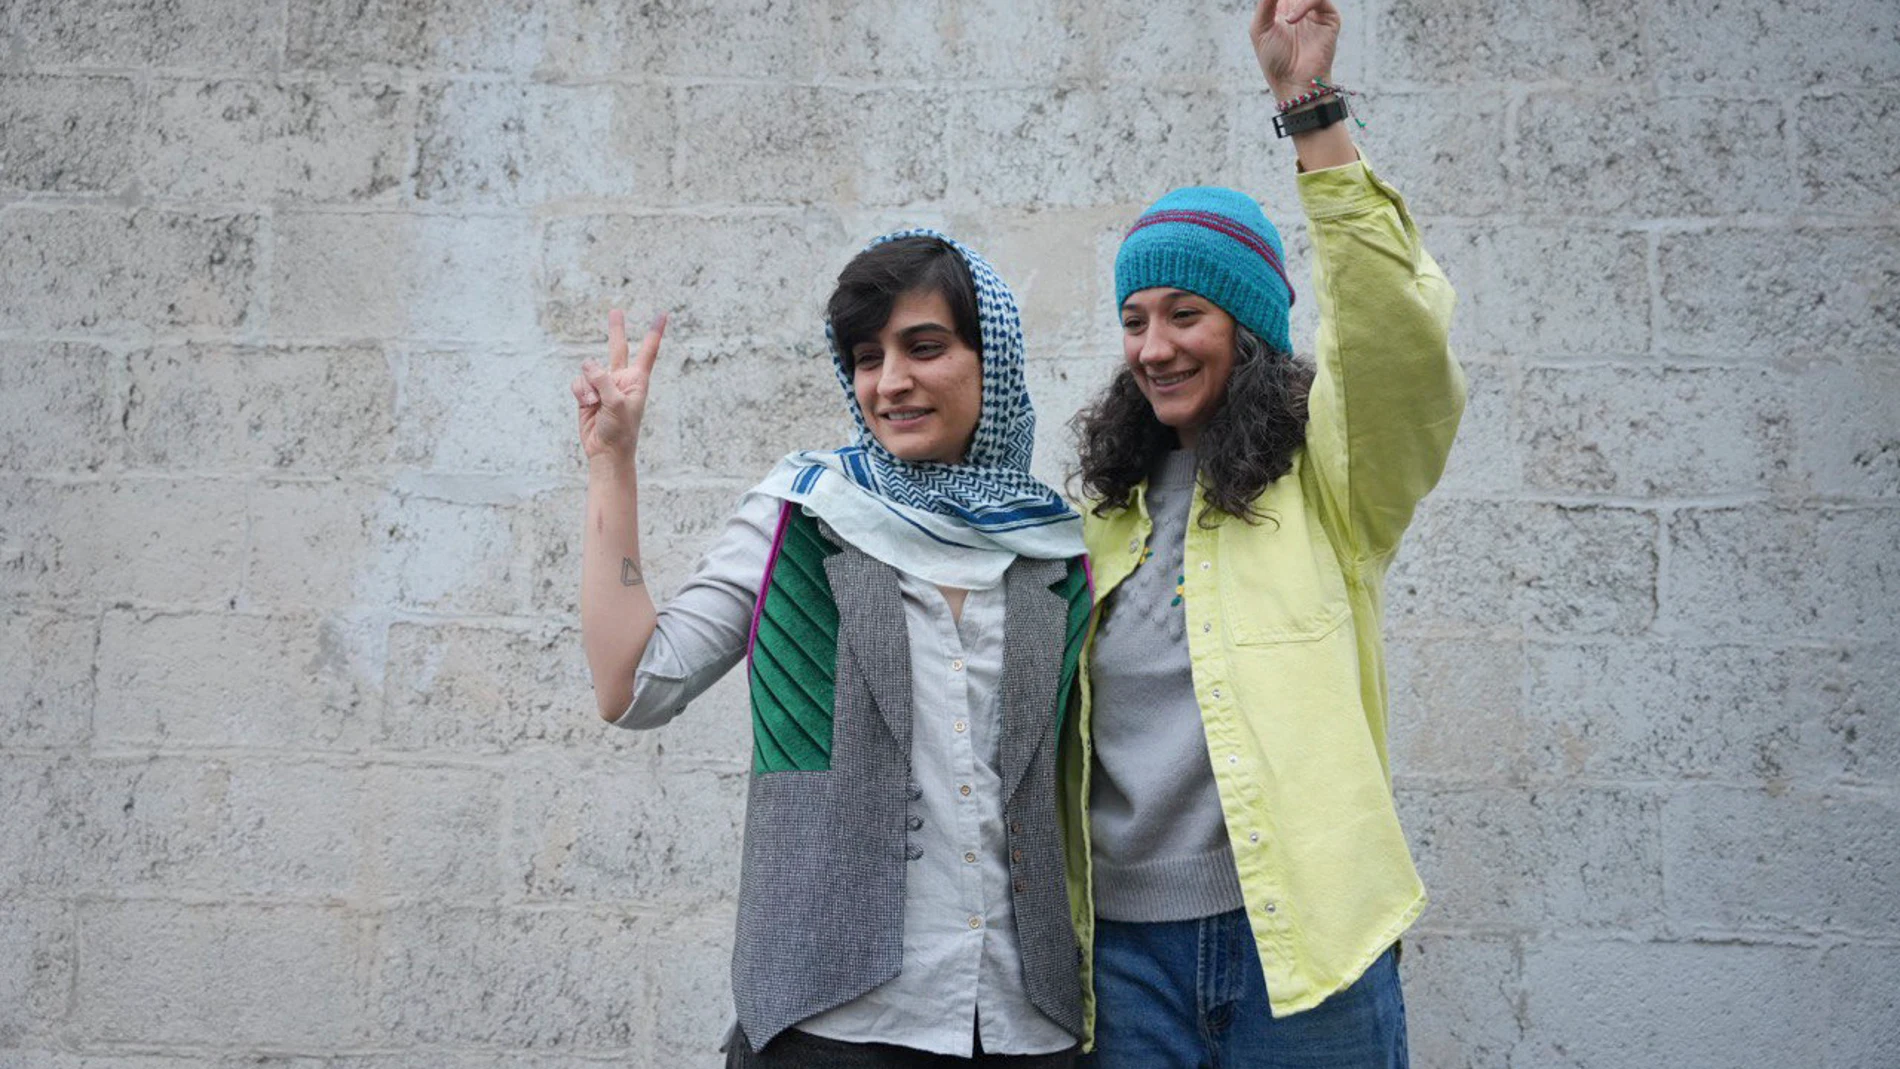 Iranian journalists Niloufar Hamedi, right, and Elaheh Mohammadi, flash the victory sign after being released from prison, in Tehran, Iran, Sunday, Jan. 14, 2024. The two who were serving long prison sentences over their coverage of the death of Mahsa Amini have been released on bail pending their appeal, Iranian media reported Sunday. (Sahand Taki, Shargh Daily News, via AP)